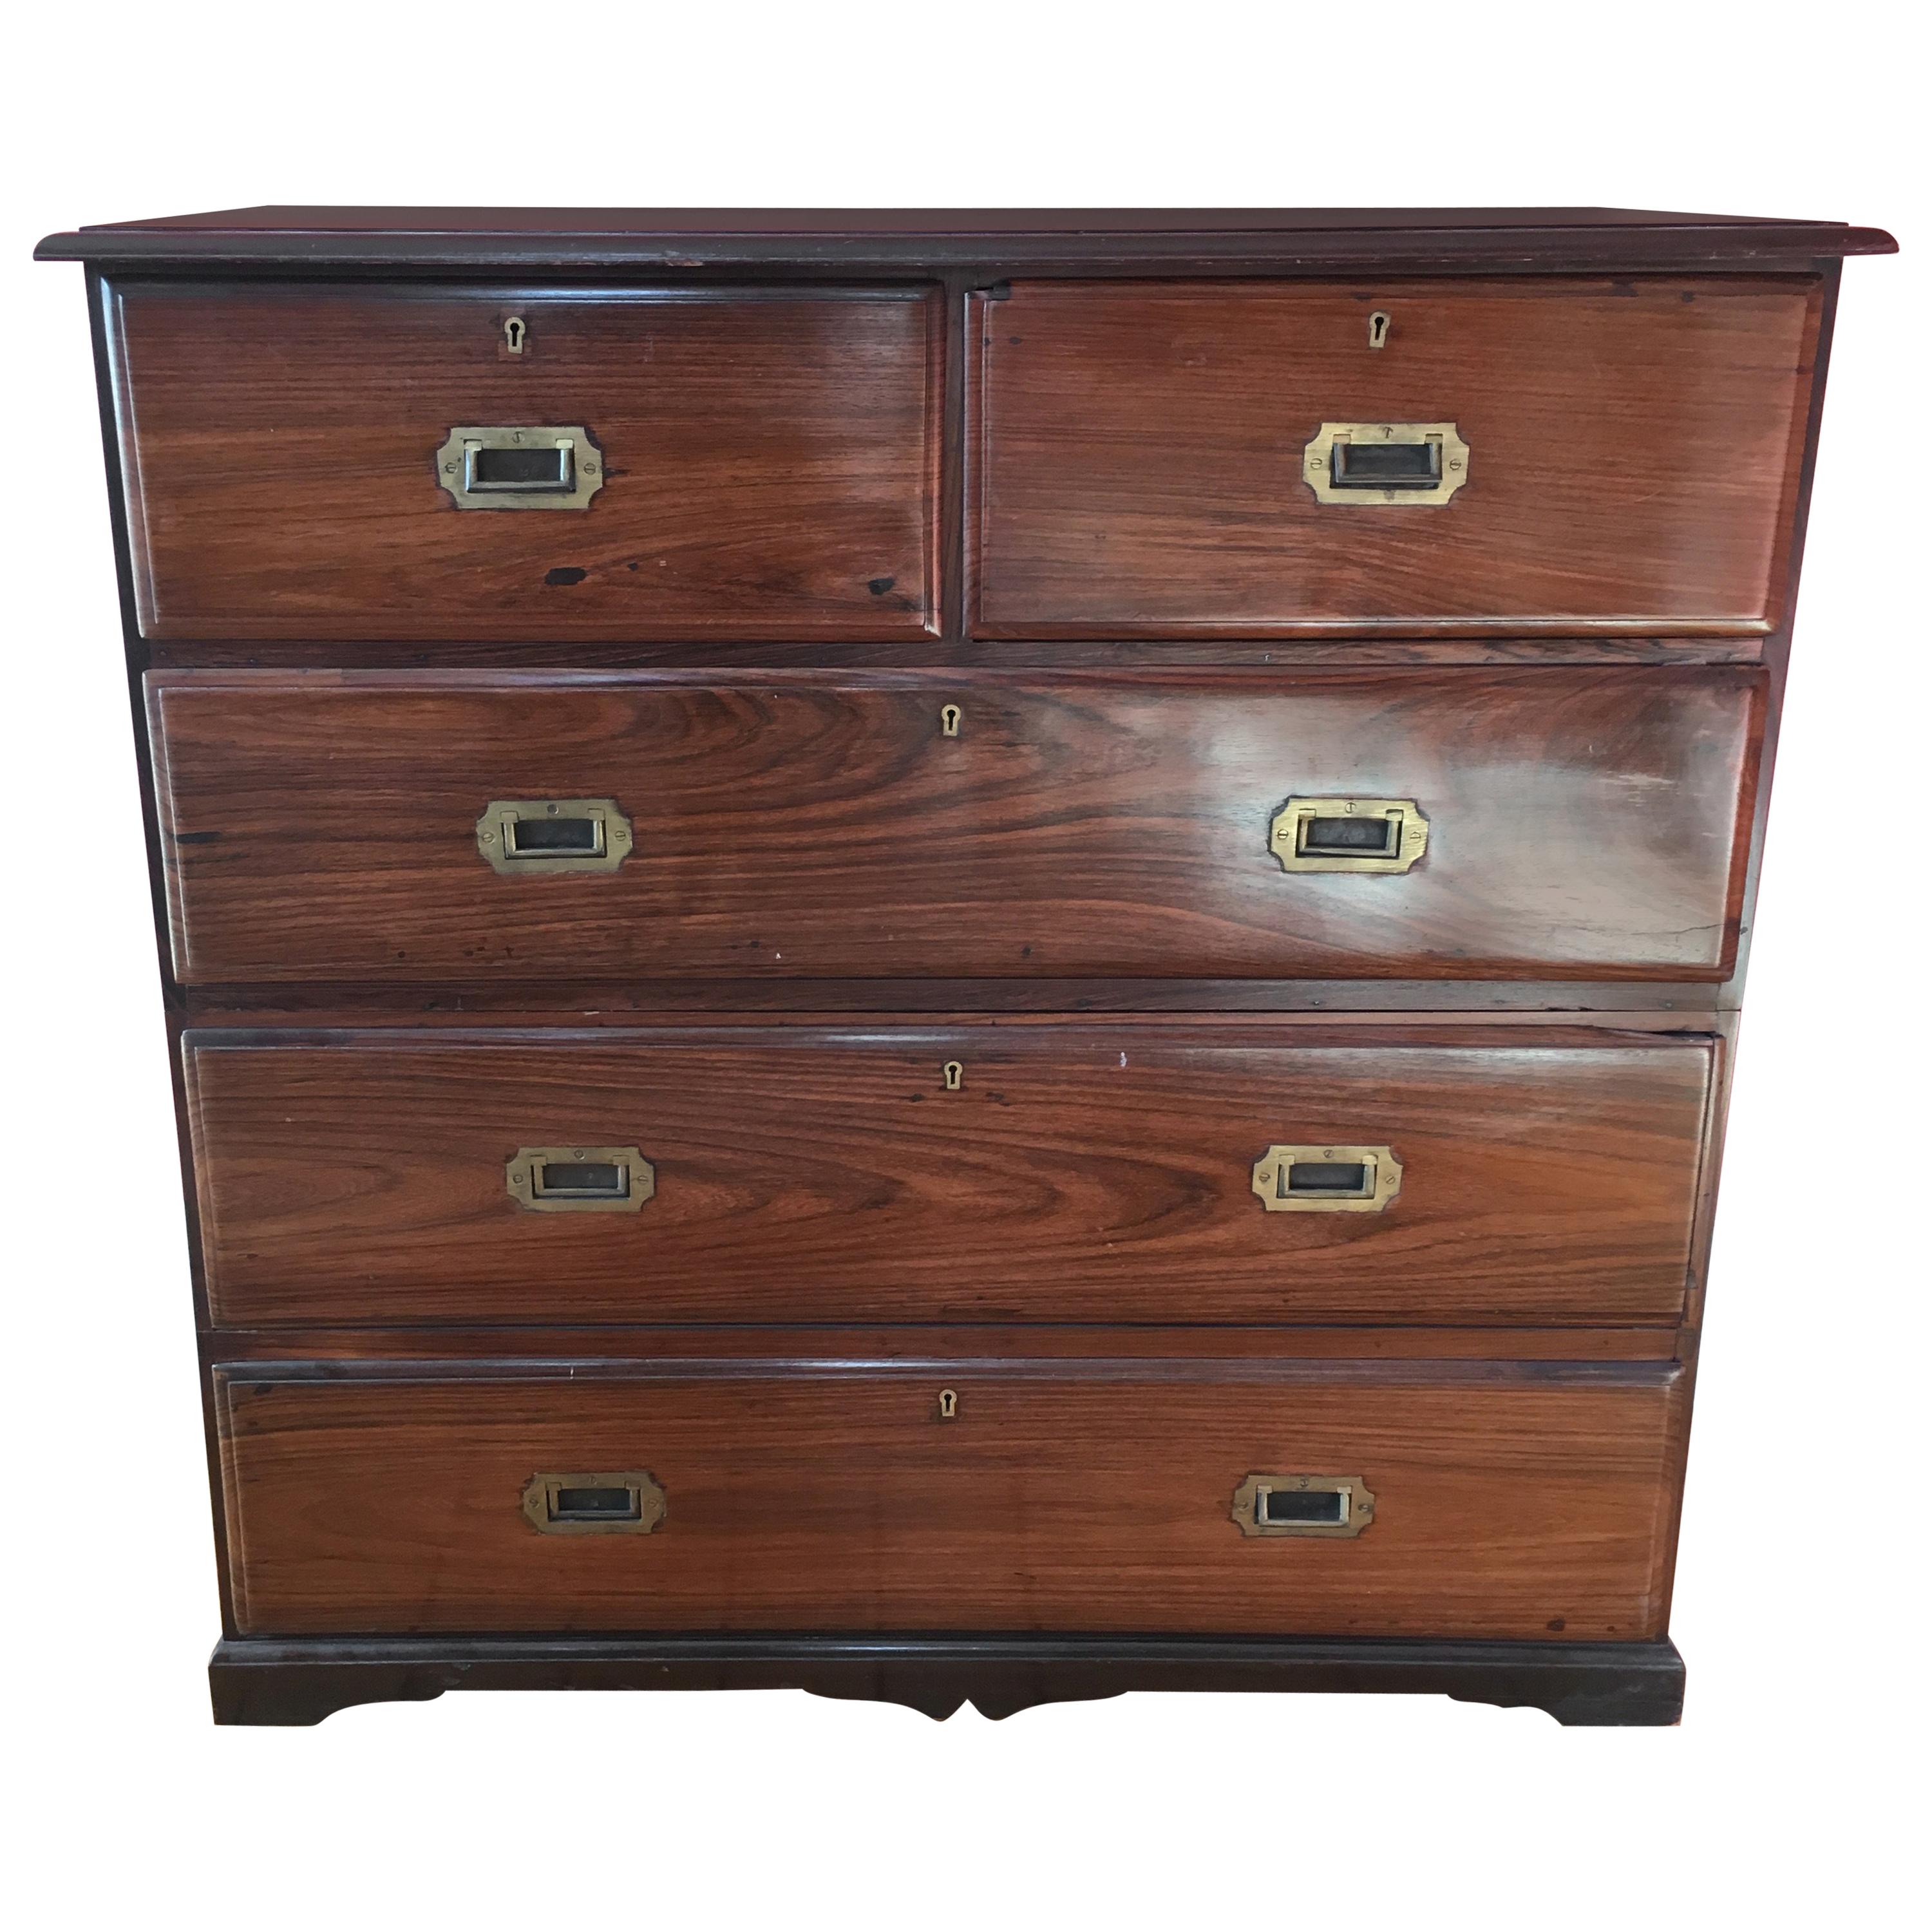 British Campaign Rosewood Chest of Drawers, Early 1900s For Sale